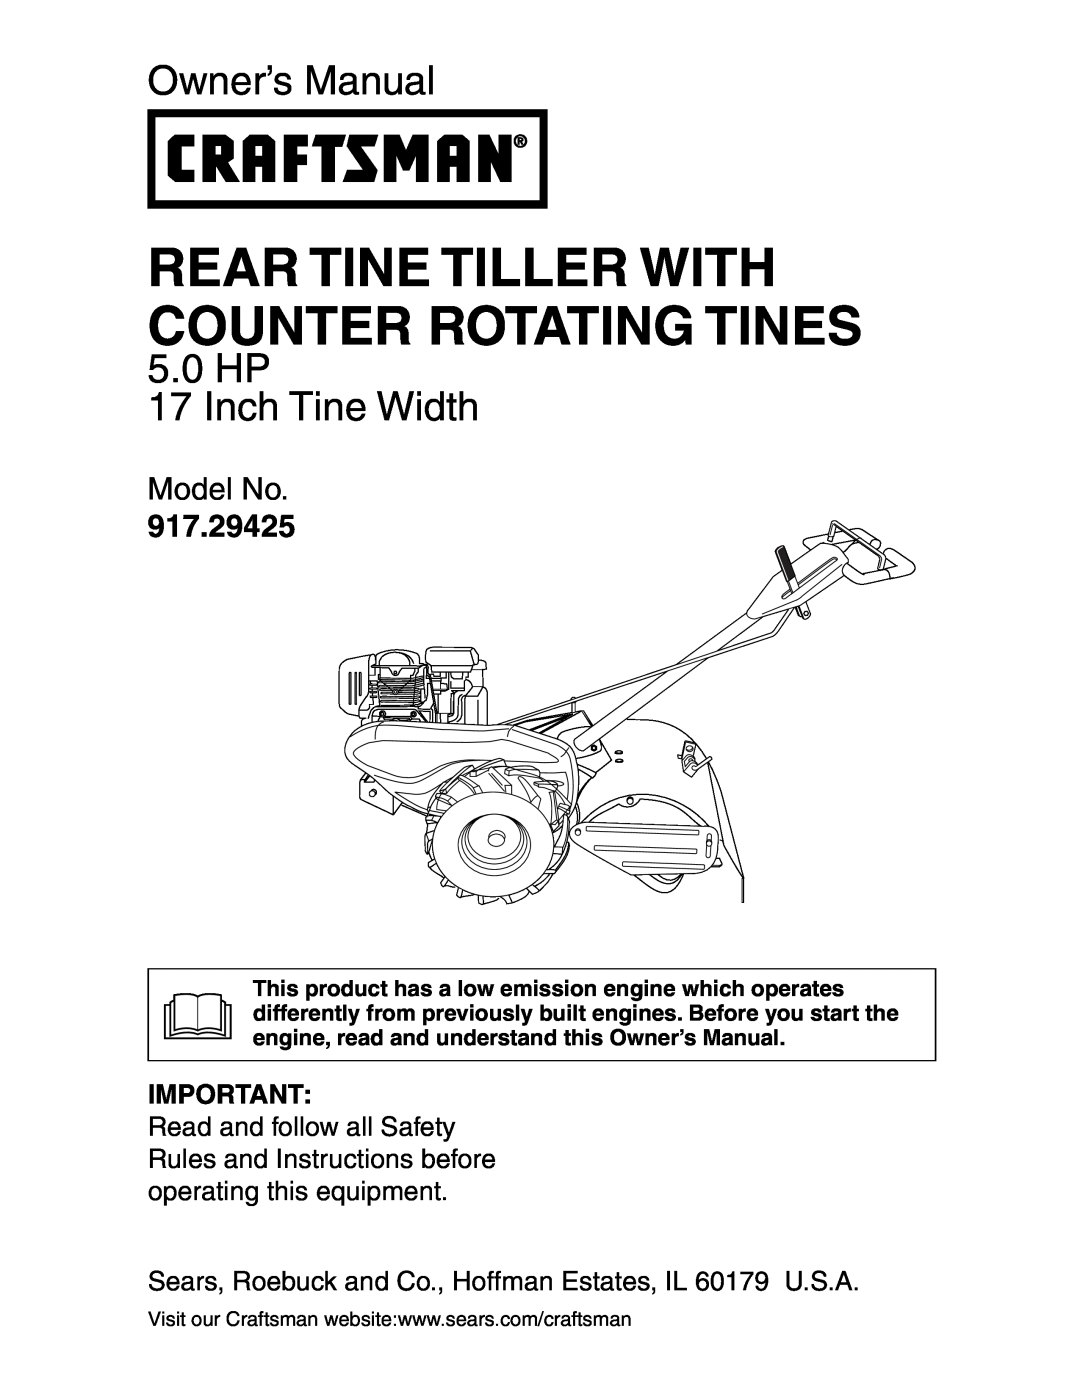 Sears 917.29425 owner manual Rear Tine Tiller With Counter Rotating Tines, 5.0 HP 17 Inch Tine Width, Model No 